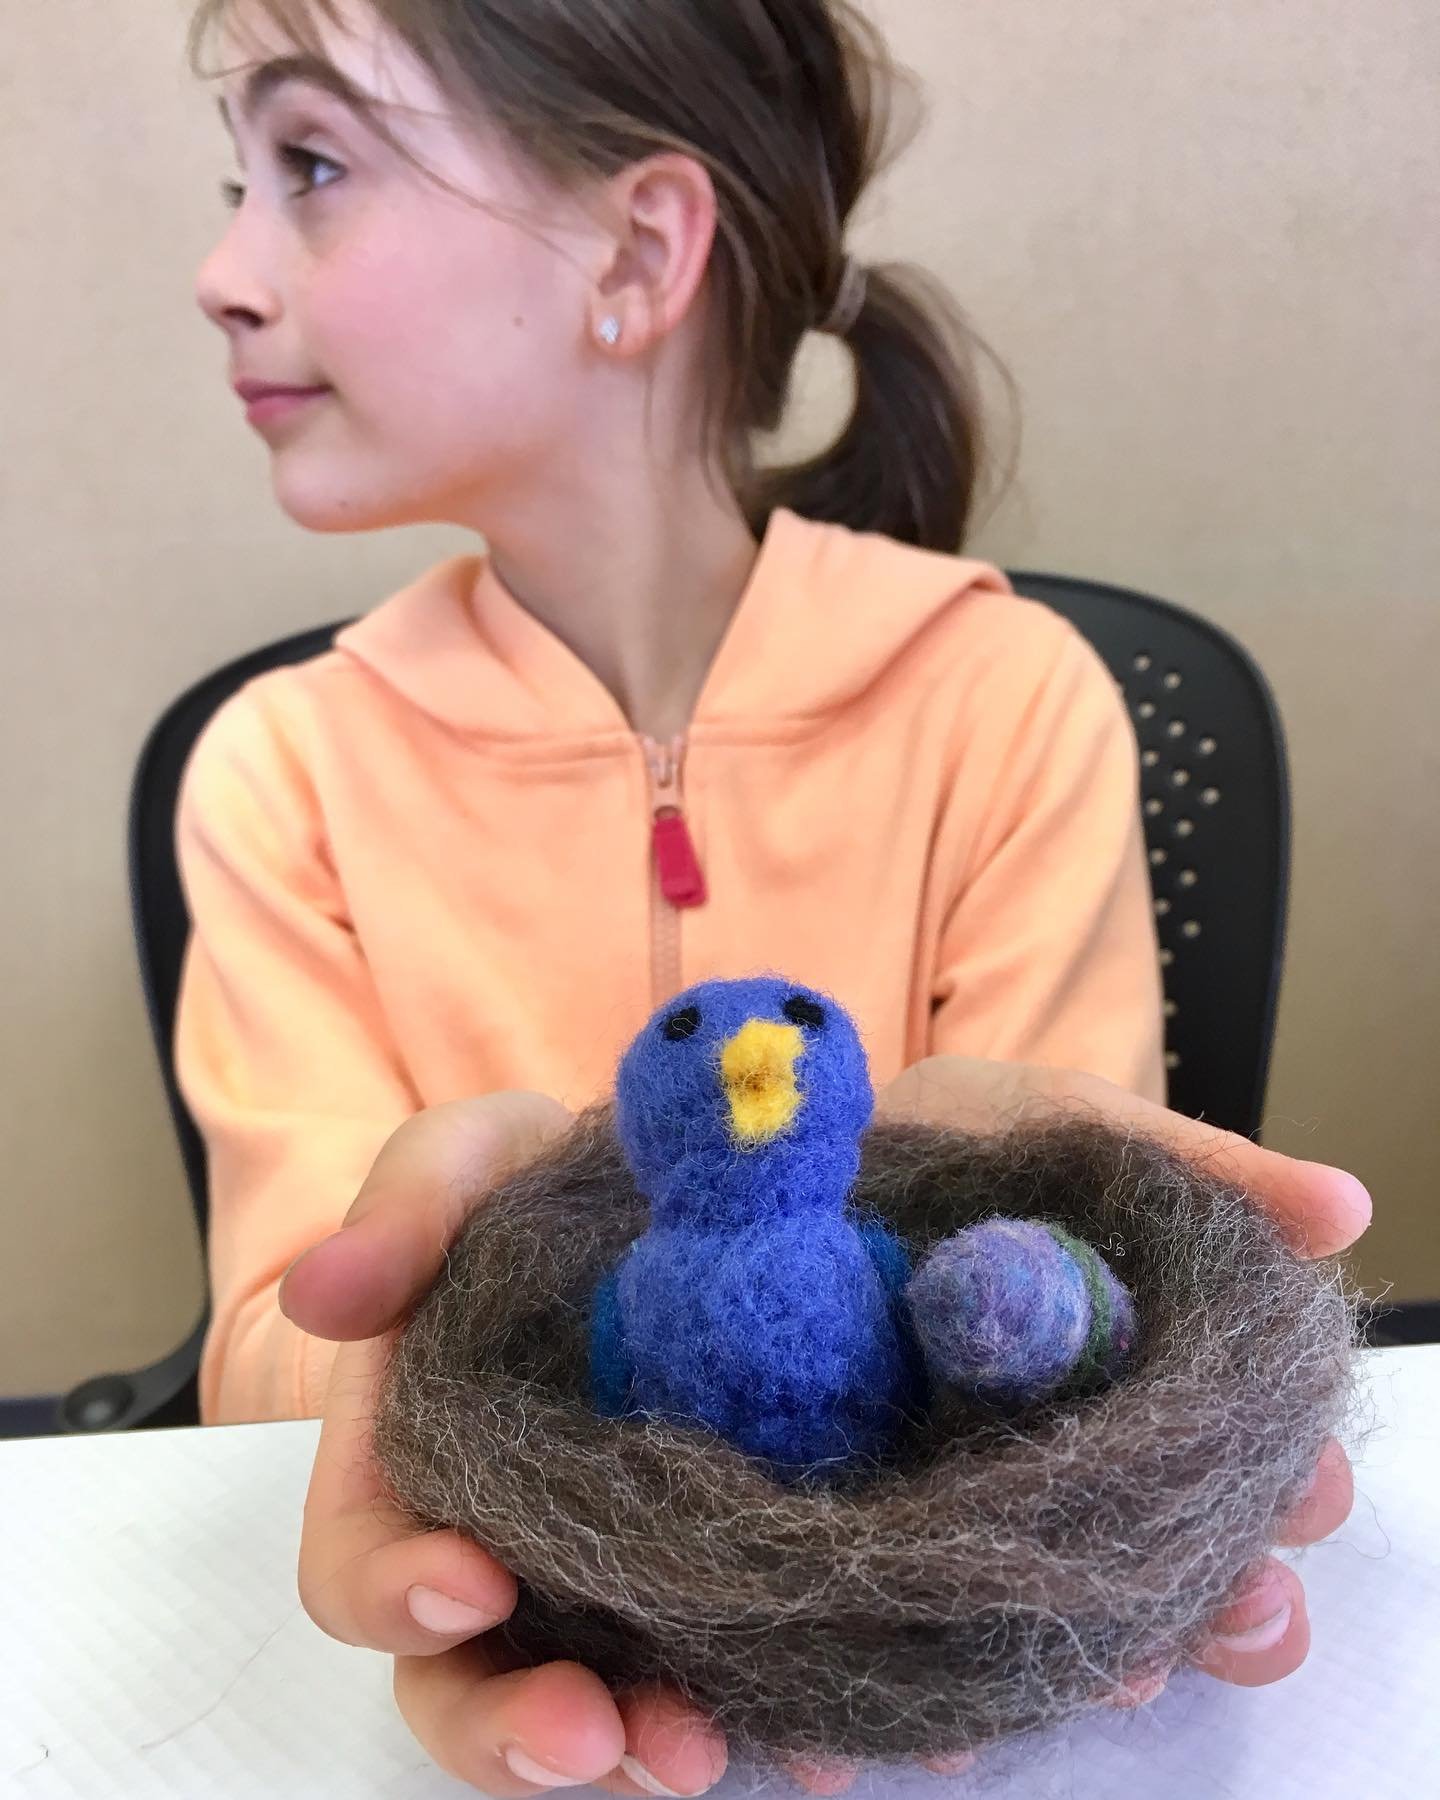 Lil sweet intro to felting workshop! Learn to make a wee bird in her nest with some tiny tiny eggs using the craft of needle felting. 🐥

This is a beginner workshop open to ages 9+&hellip; no experience necessary! I will hold your hand, promise. 

M